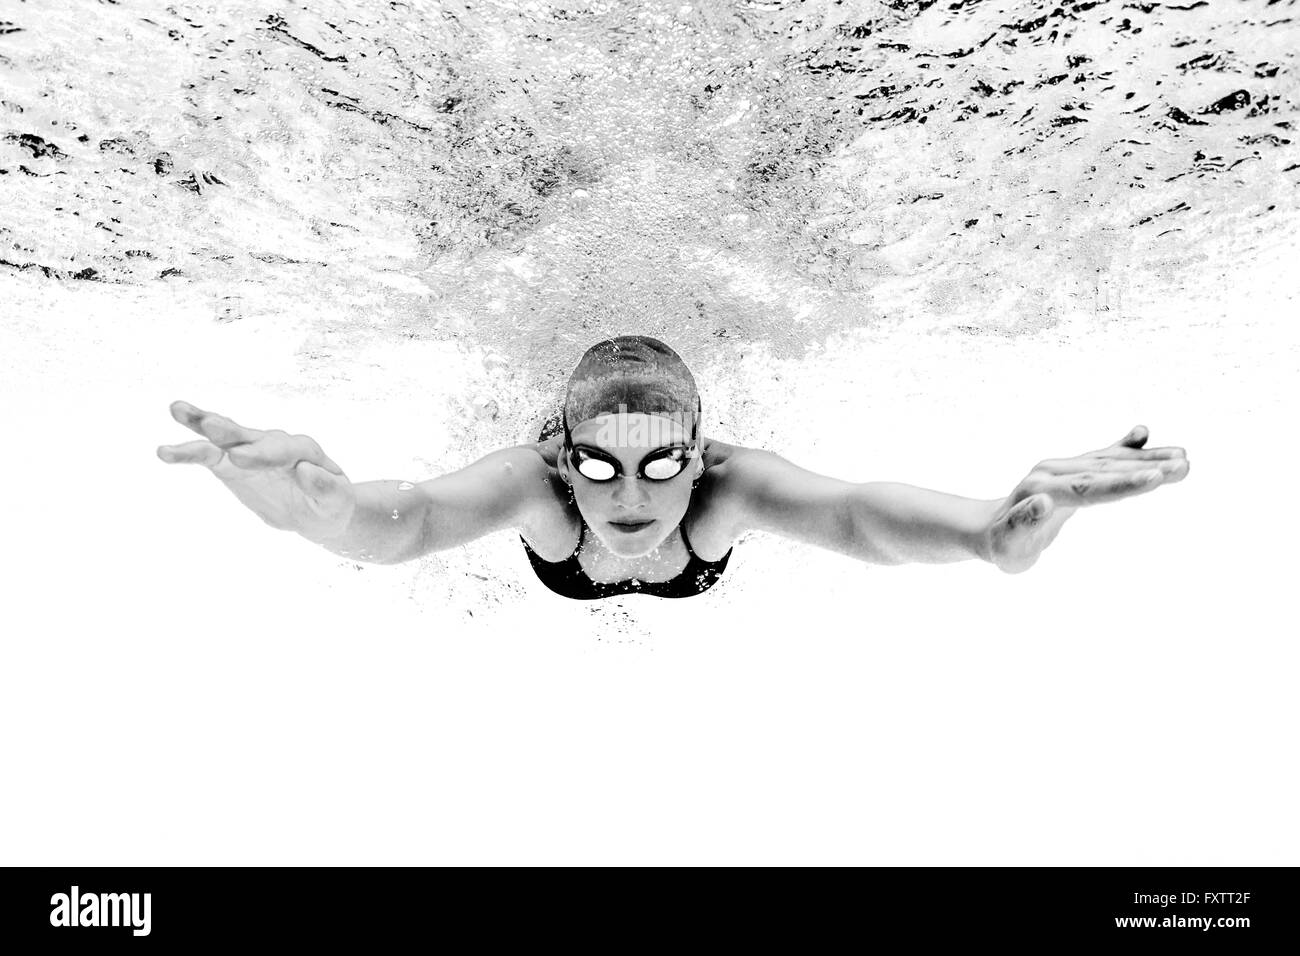 Young woman swimming underwater Banque D'Images